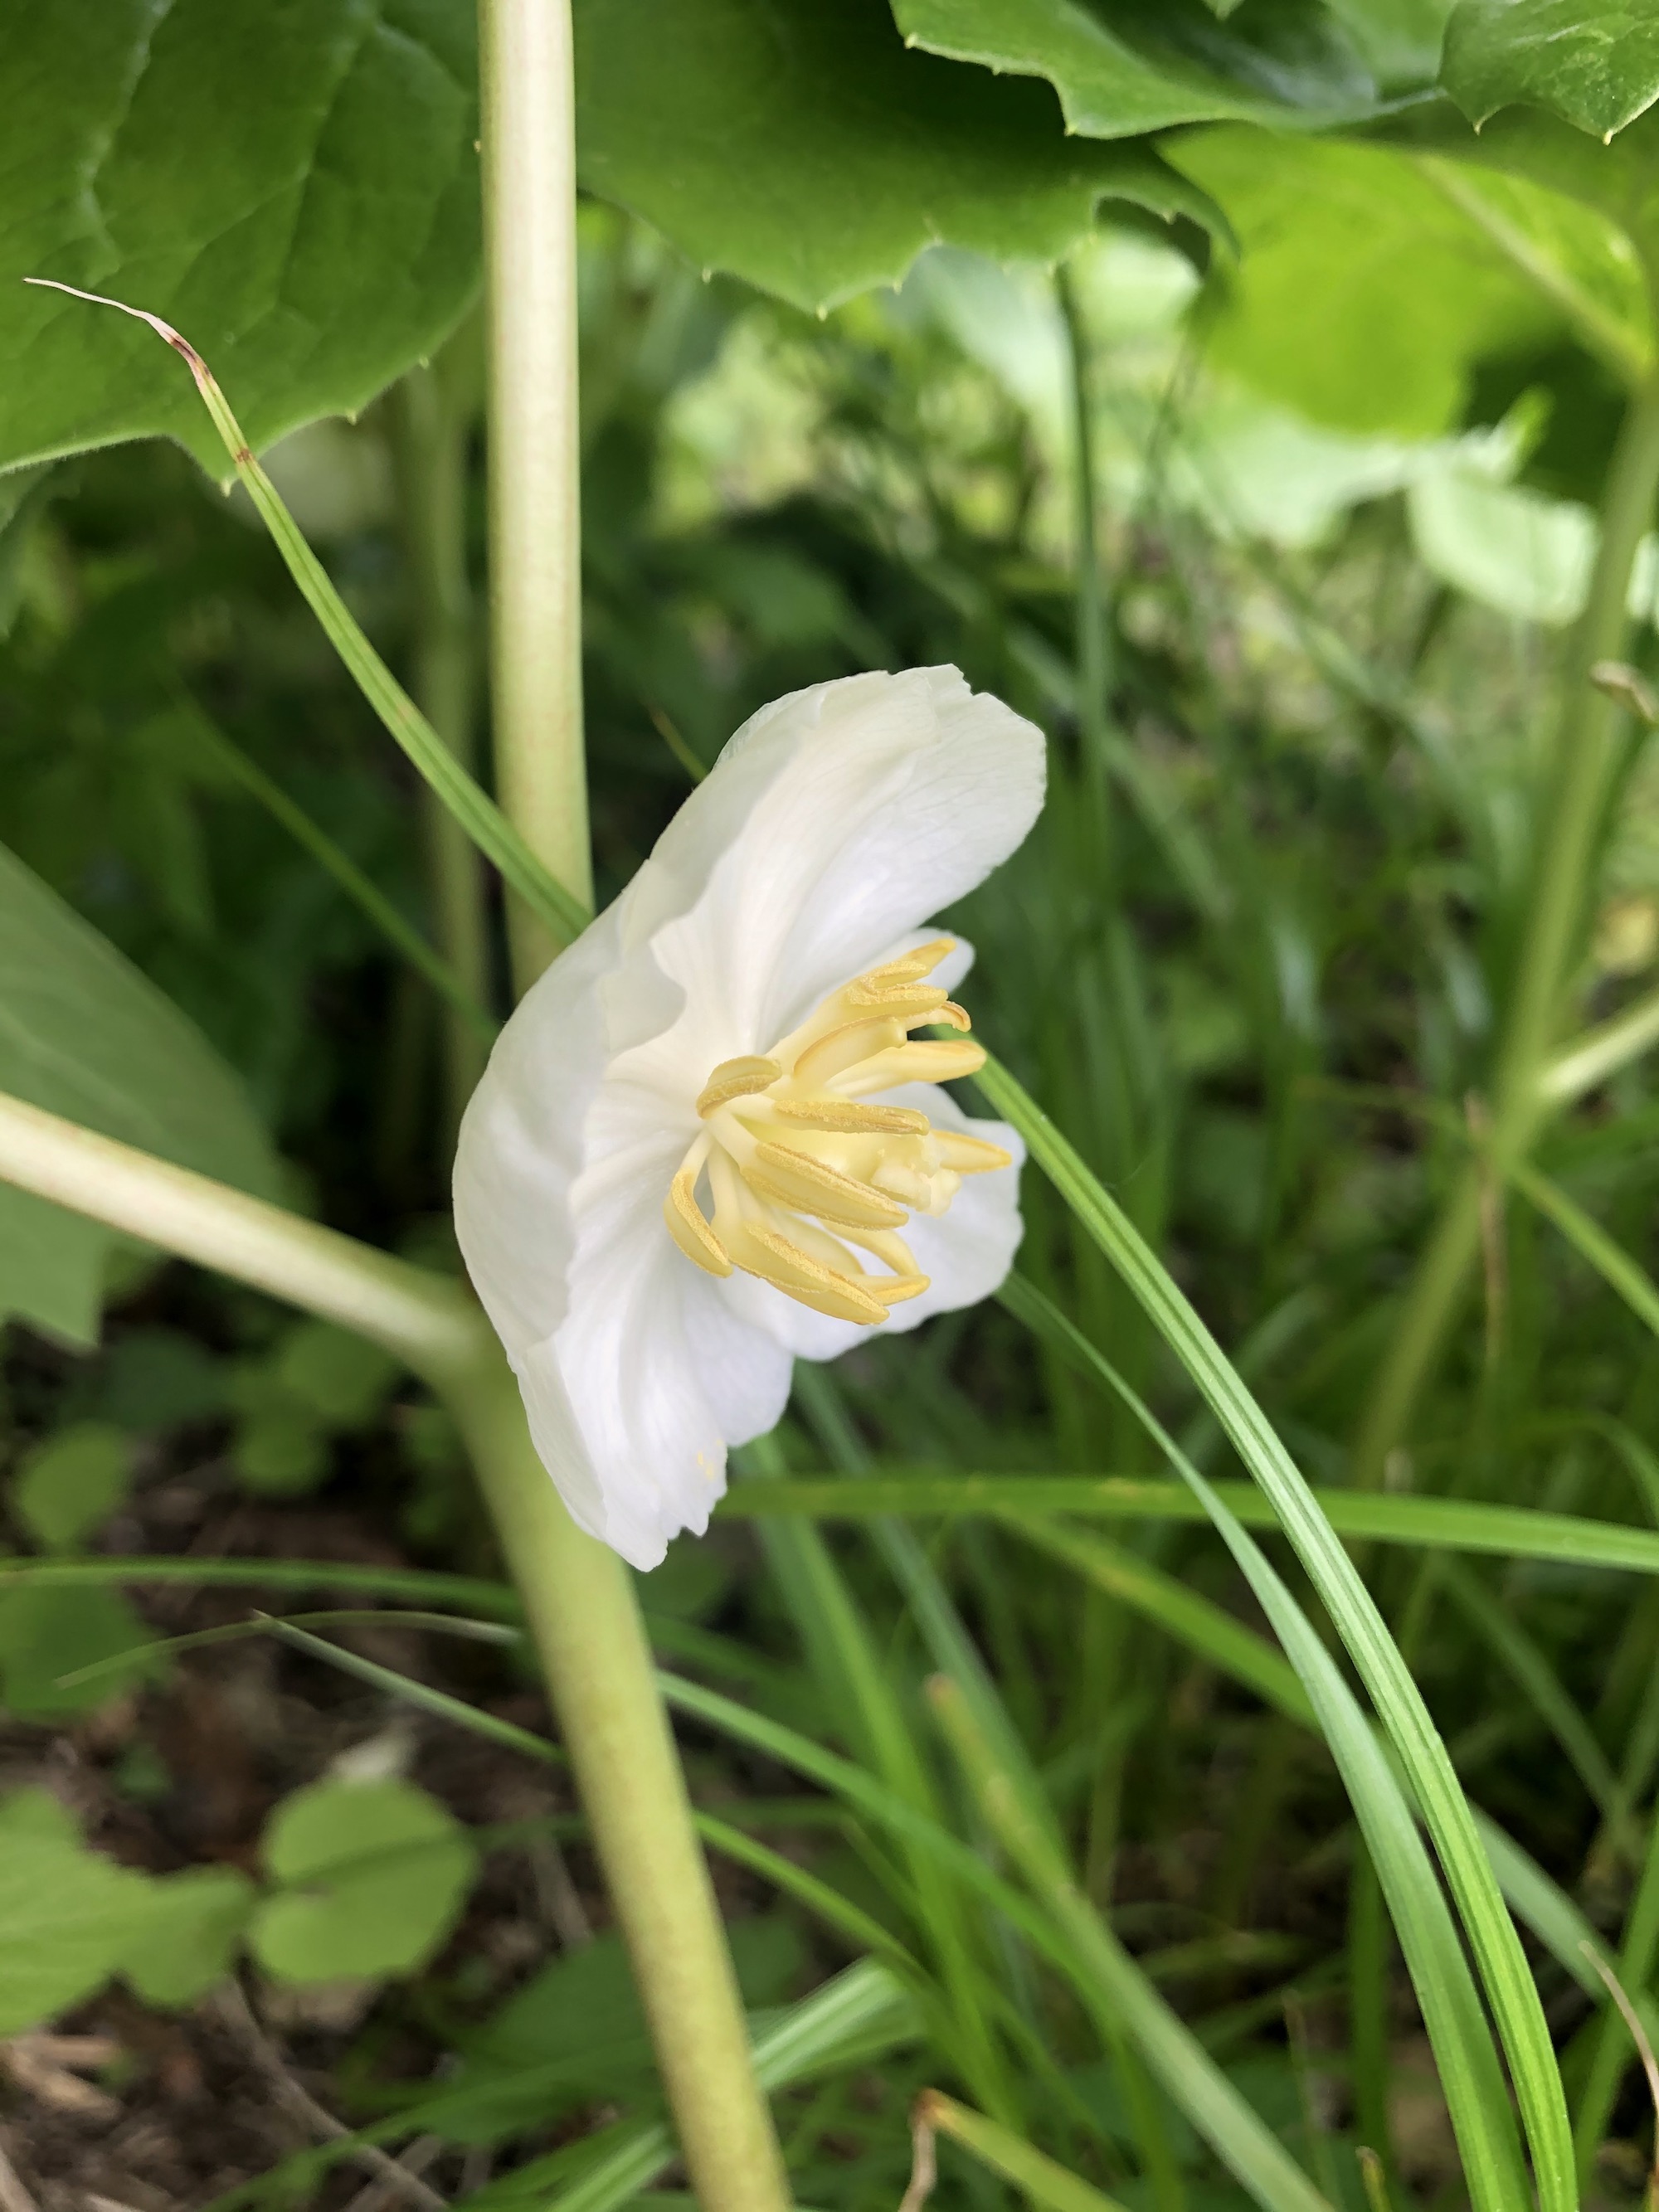 Mayapple blooms by Council Ring in Madison, Wisconsin on May 10, 2021.